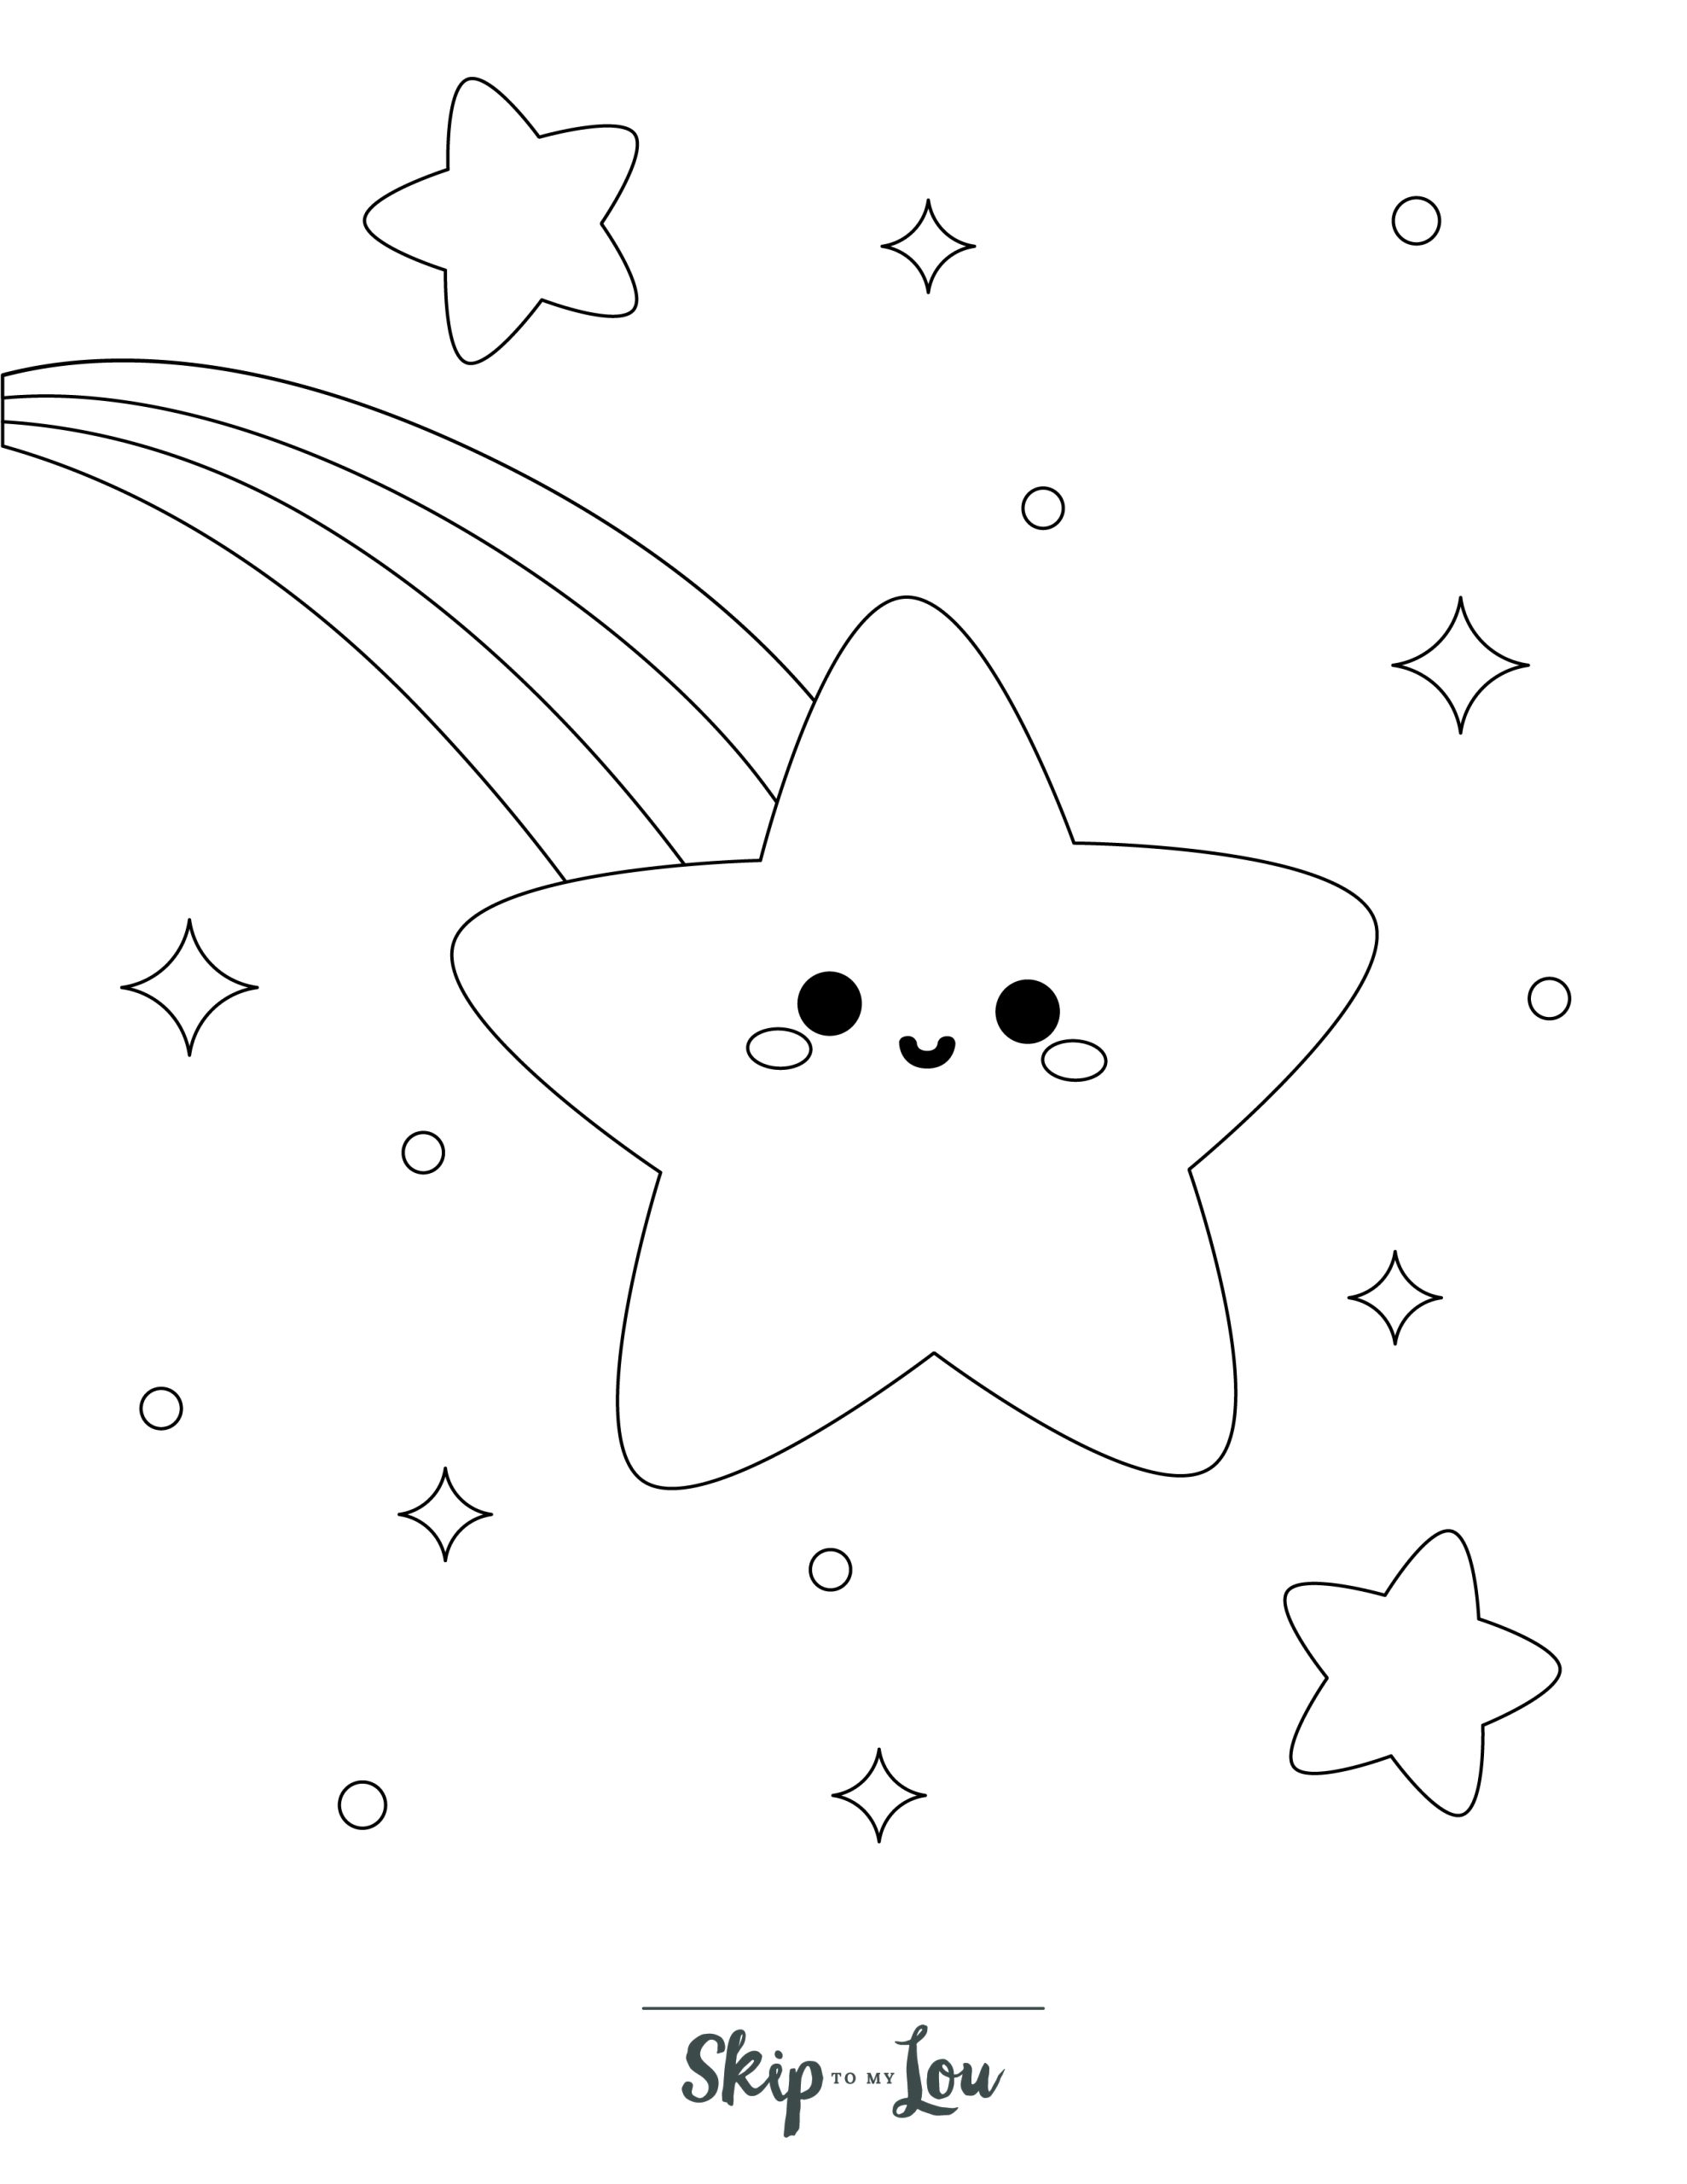 Skip to my Lou - Star Coloring Pages - Line drawing of a large star with a face, with a rainbow and smaller stars in the background